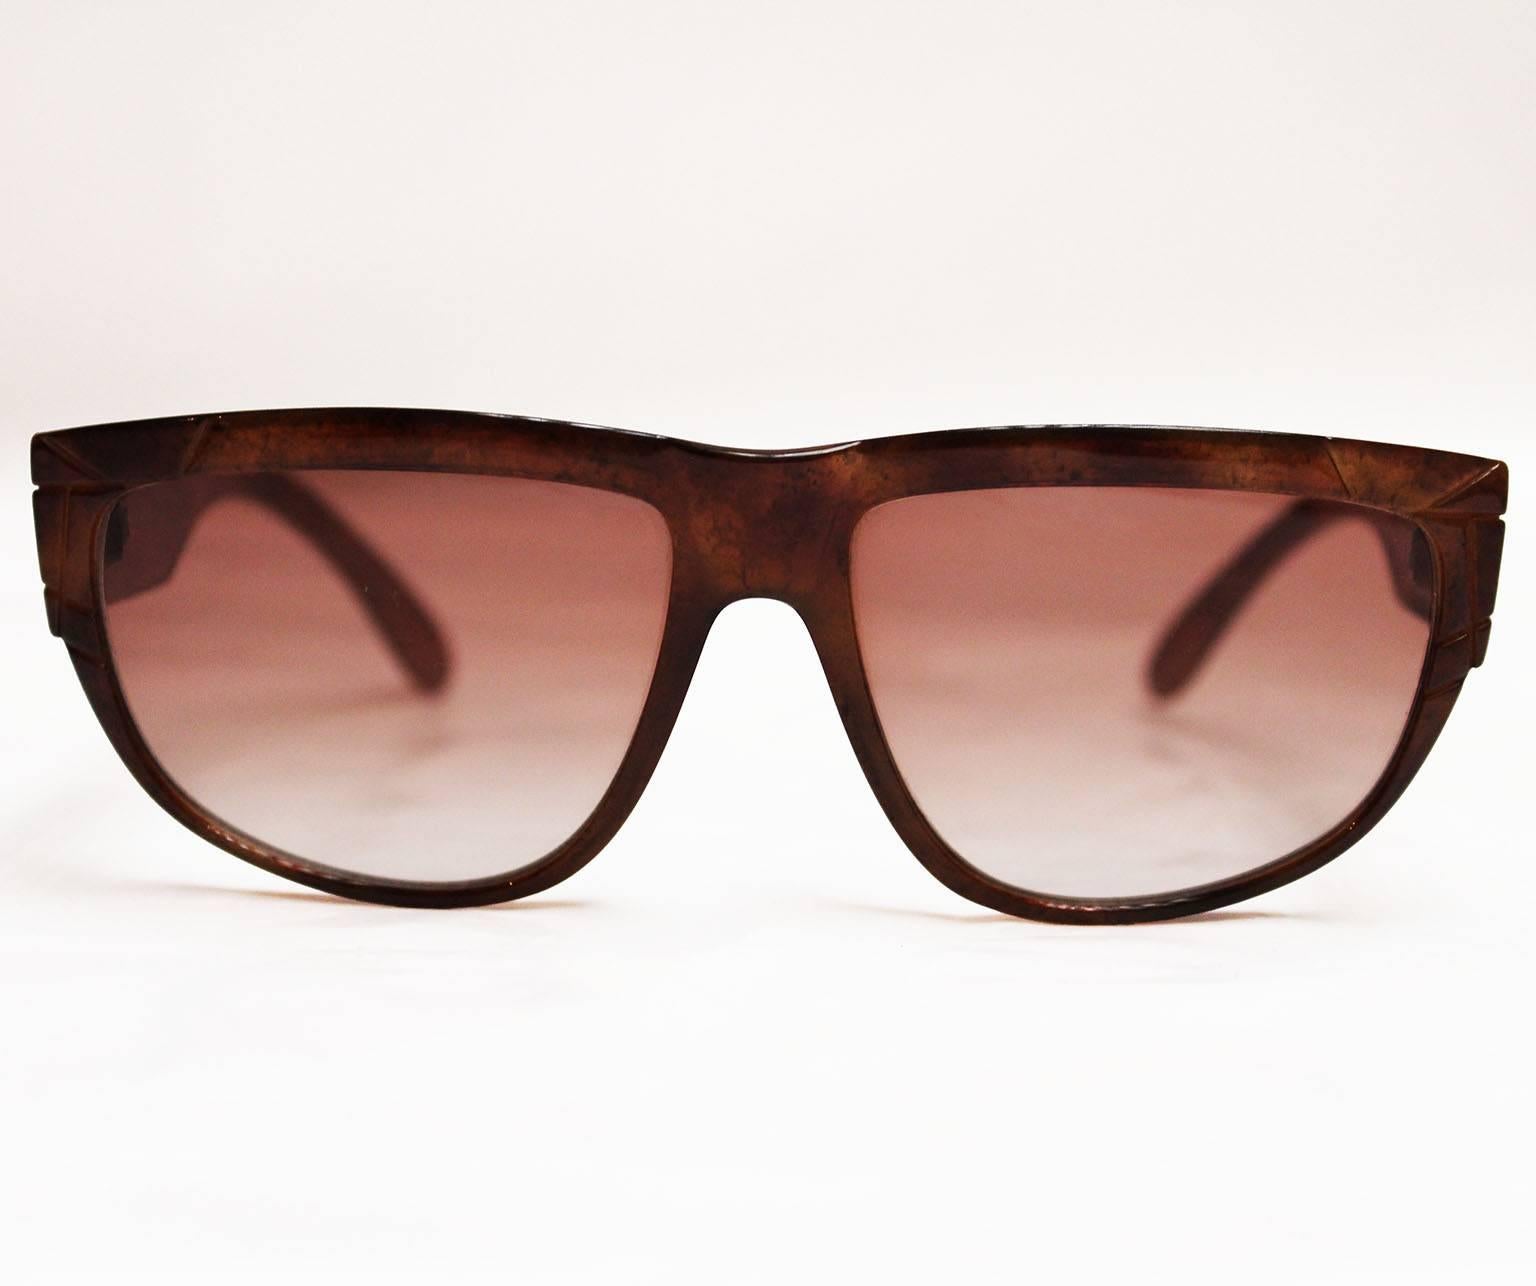 A wonderful pair of Yves Saint Laurent sunglasses,Marrakech -9 Y147. The frames have a brown marble look with geometric molding on each arm.Near the hinge on each arm is a gold YSL logo.
On the inside of the right arm is stamped, YvesSaintLaurent